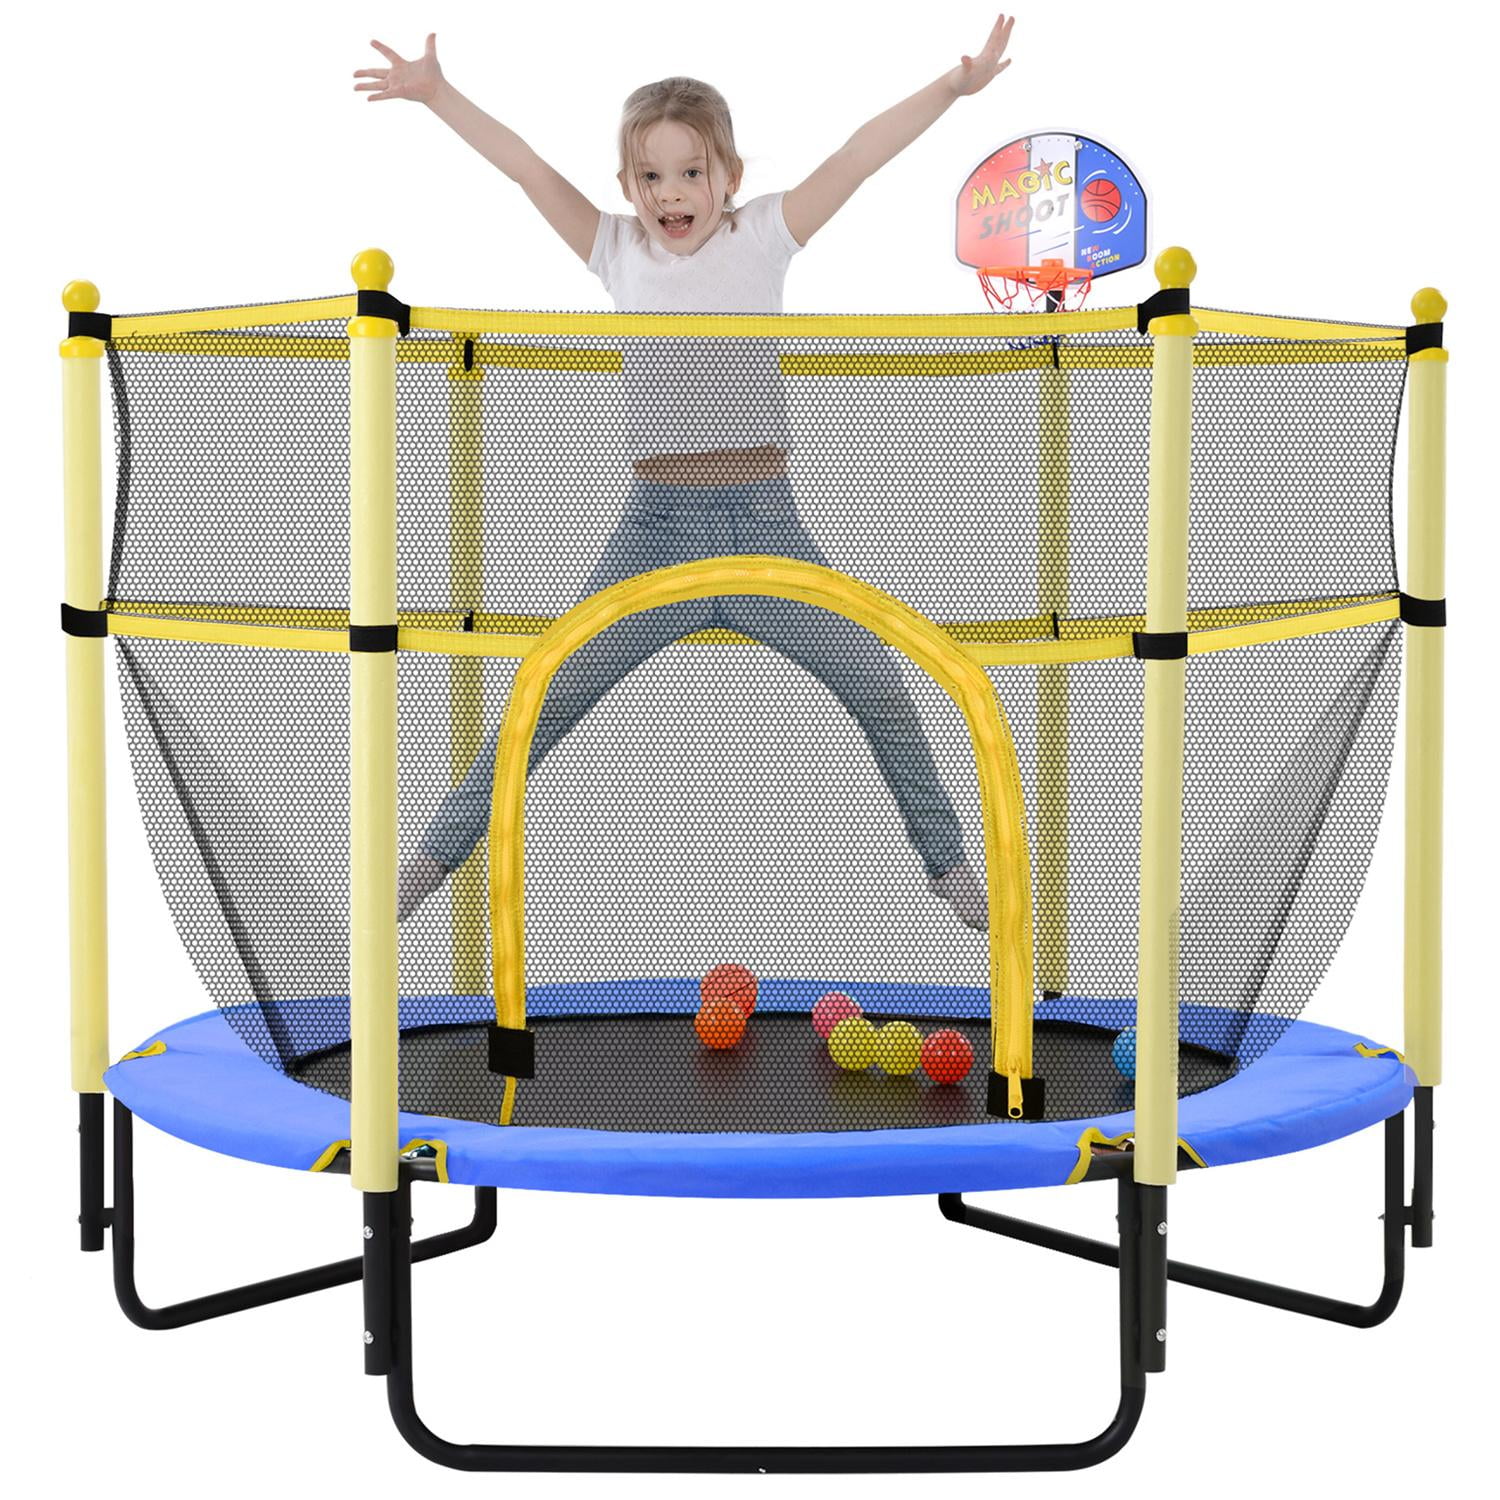 60 Trampoline for Kids Mini Baby Toddler Trampoline with Basketball Hoop 5FT Indoor Outdoor Trampoline with Enclosure Net Recreational Trampolines Birthday Gifts for Children. 